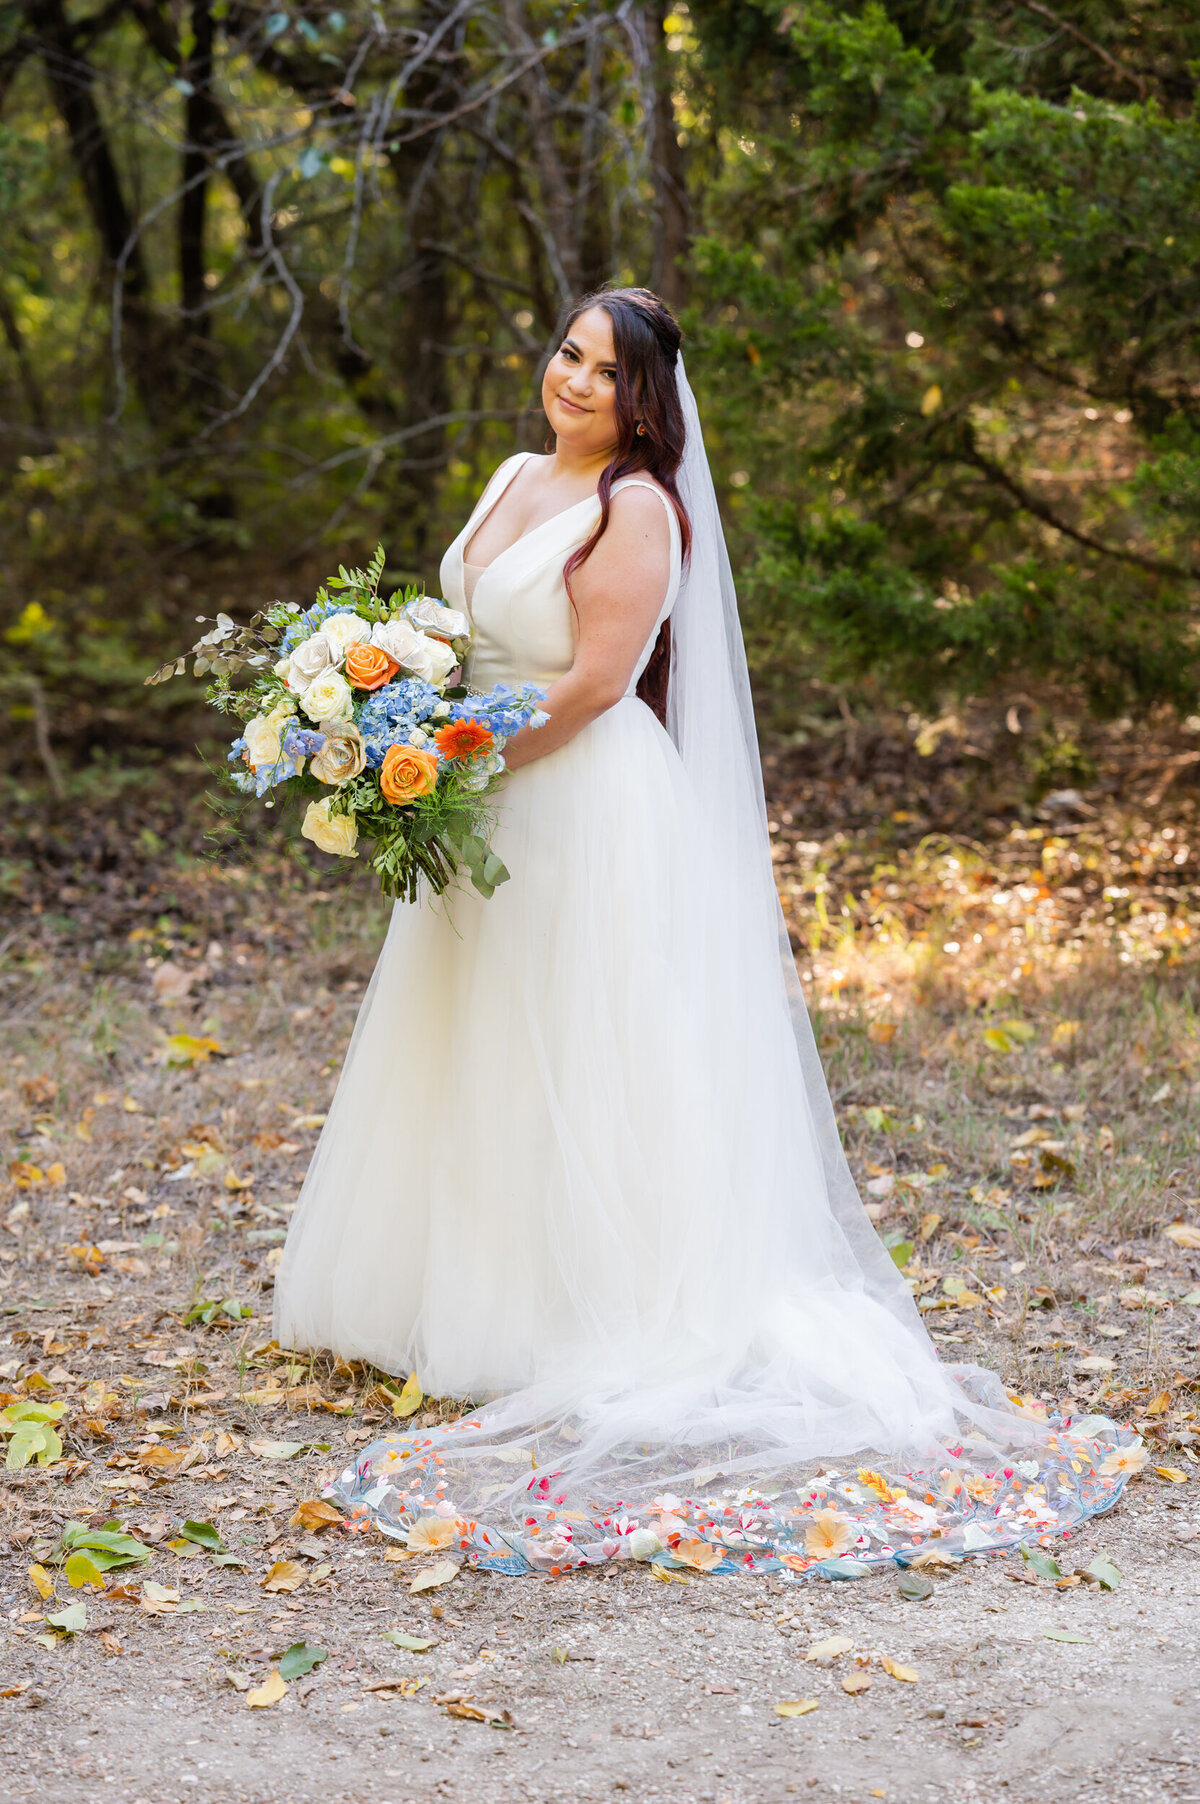 Bride with colorful veil in McKinney